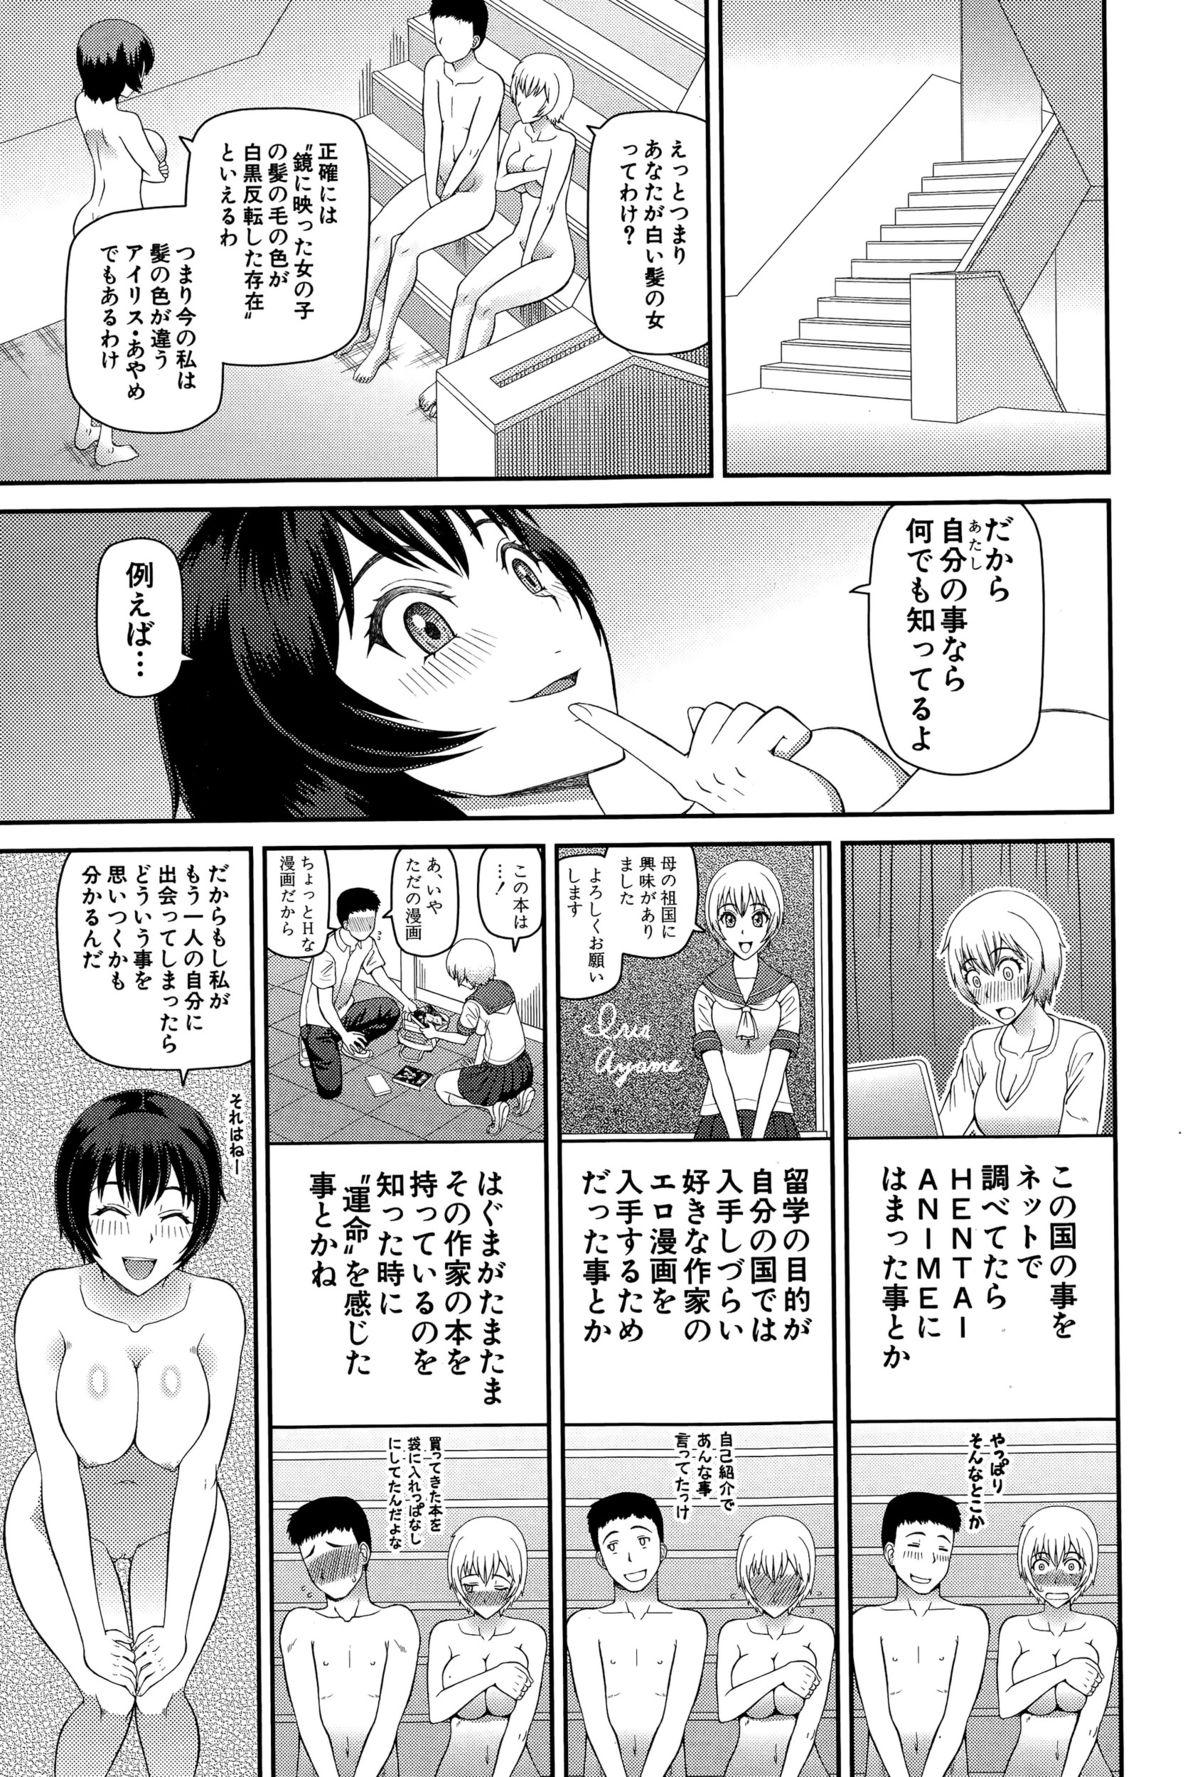 BUSTER COMIC 2015-07 206